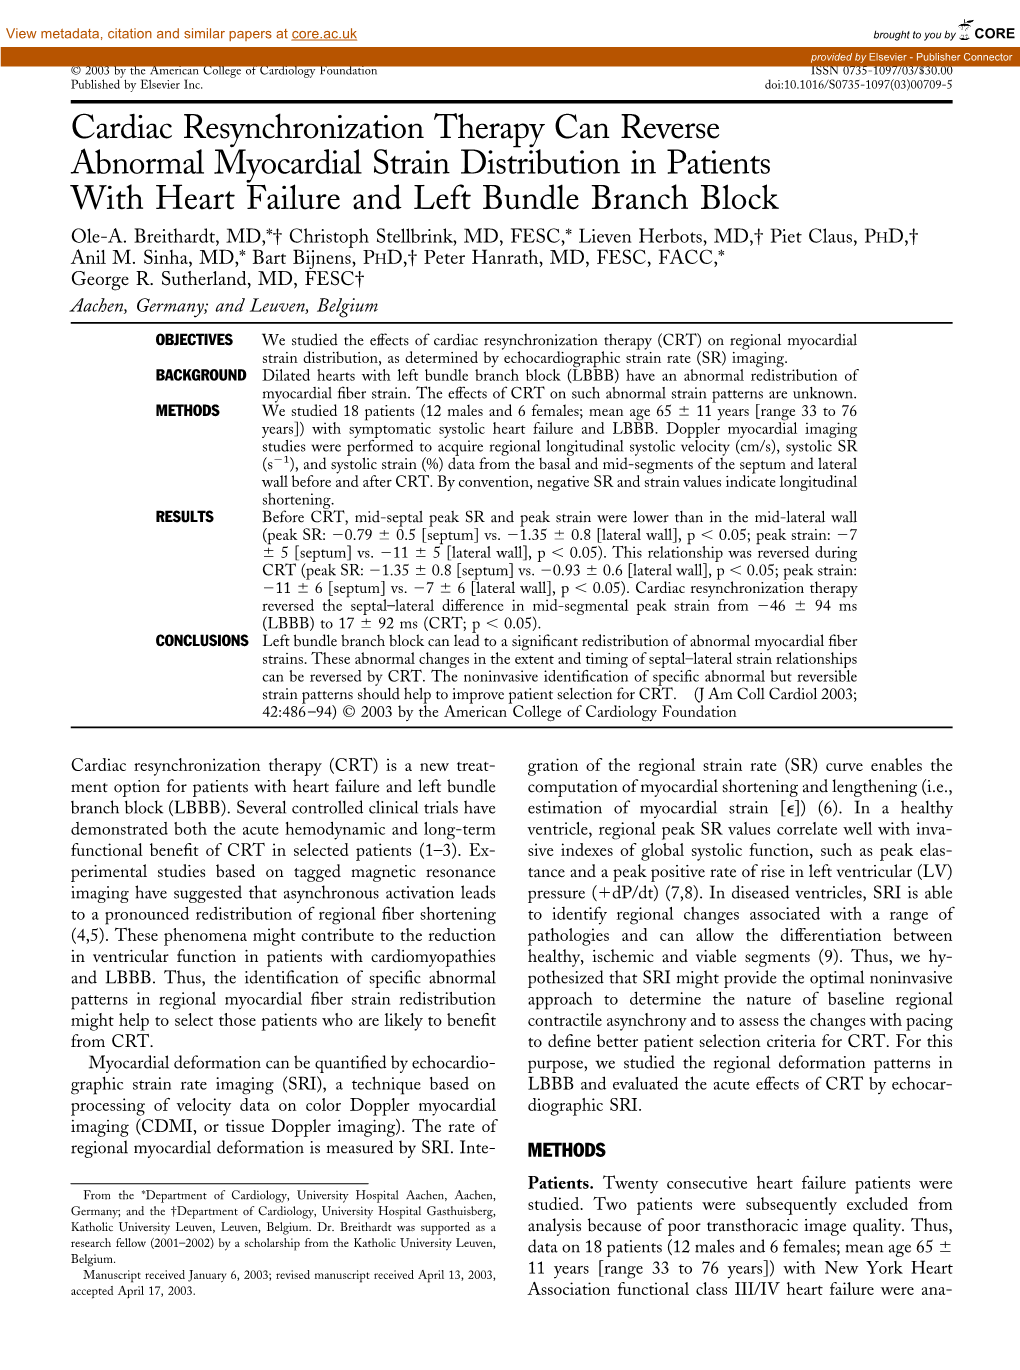 Cardiac Resynchronization Therapy Can Reverse Abnormal Myocardial Strain Distribution in Patients with Heart Failure and Left Bundle Branch Block Ole-A